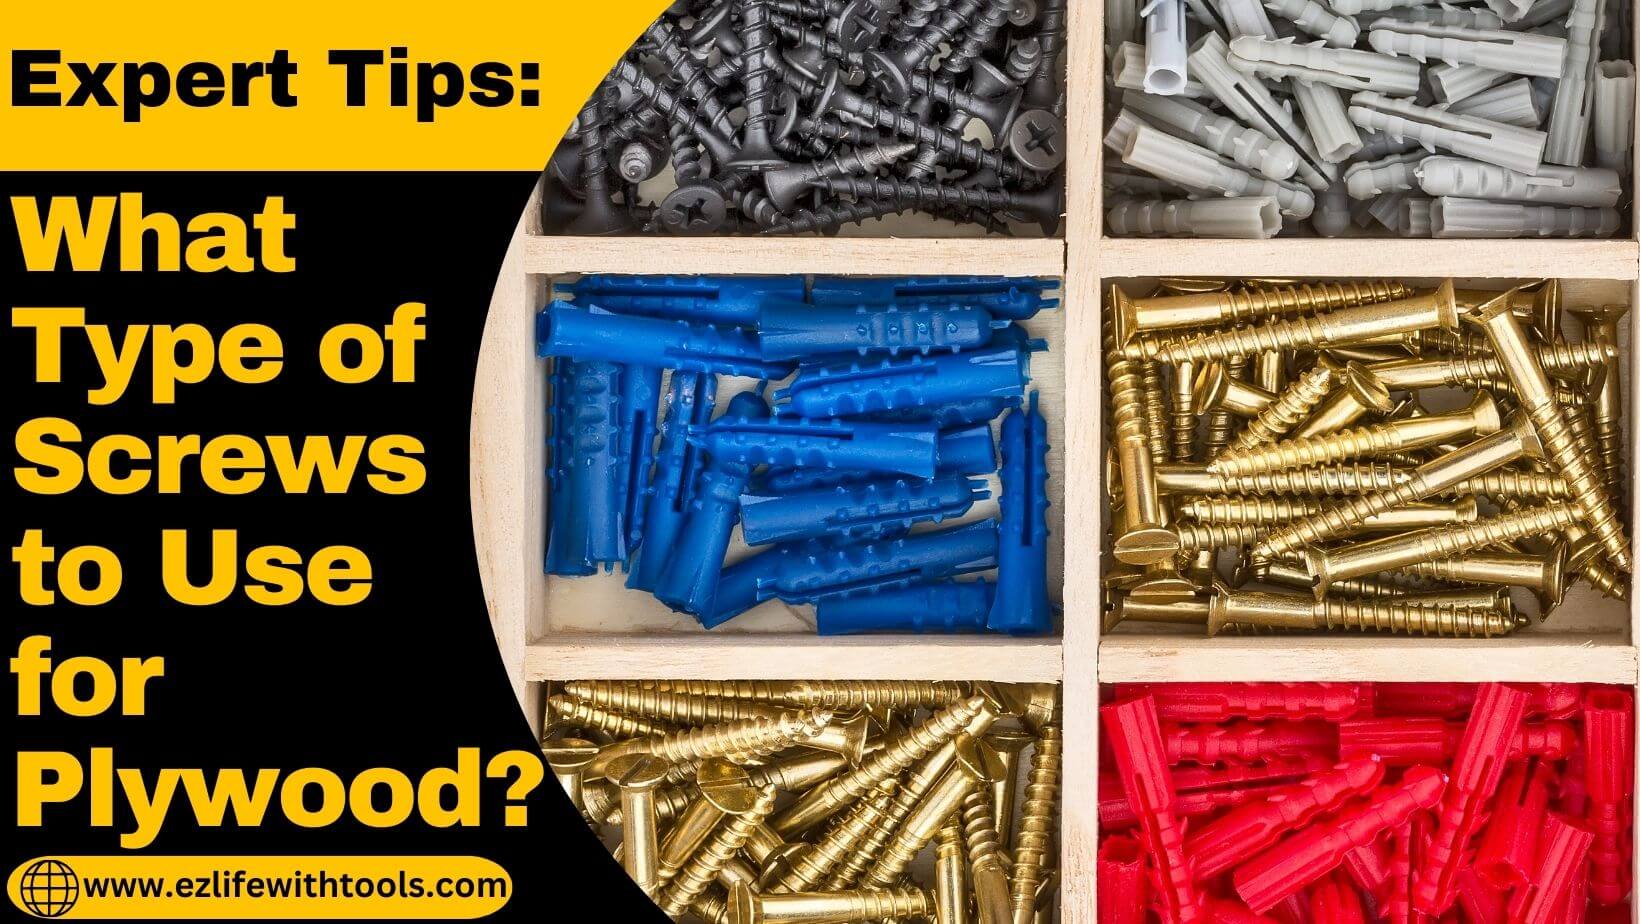 What Type of Screws to Use for Plywood